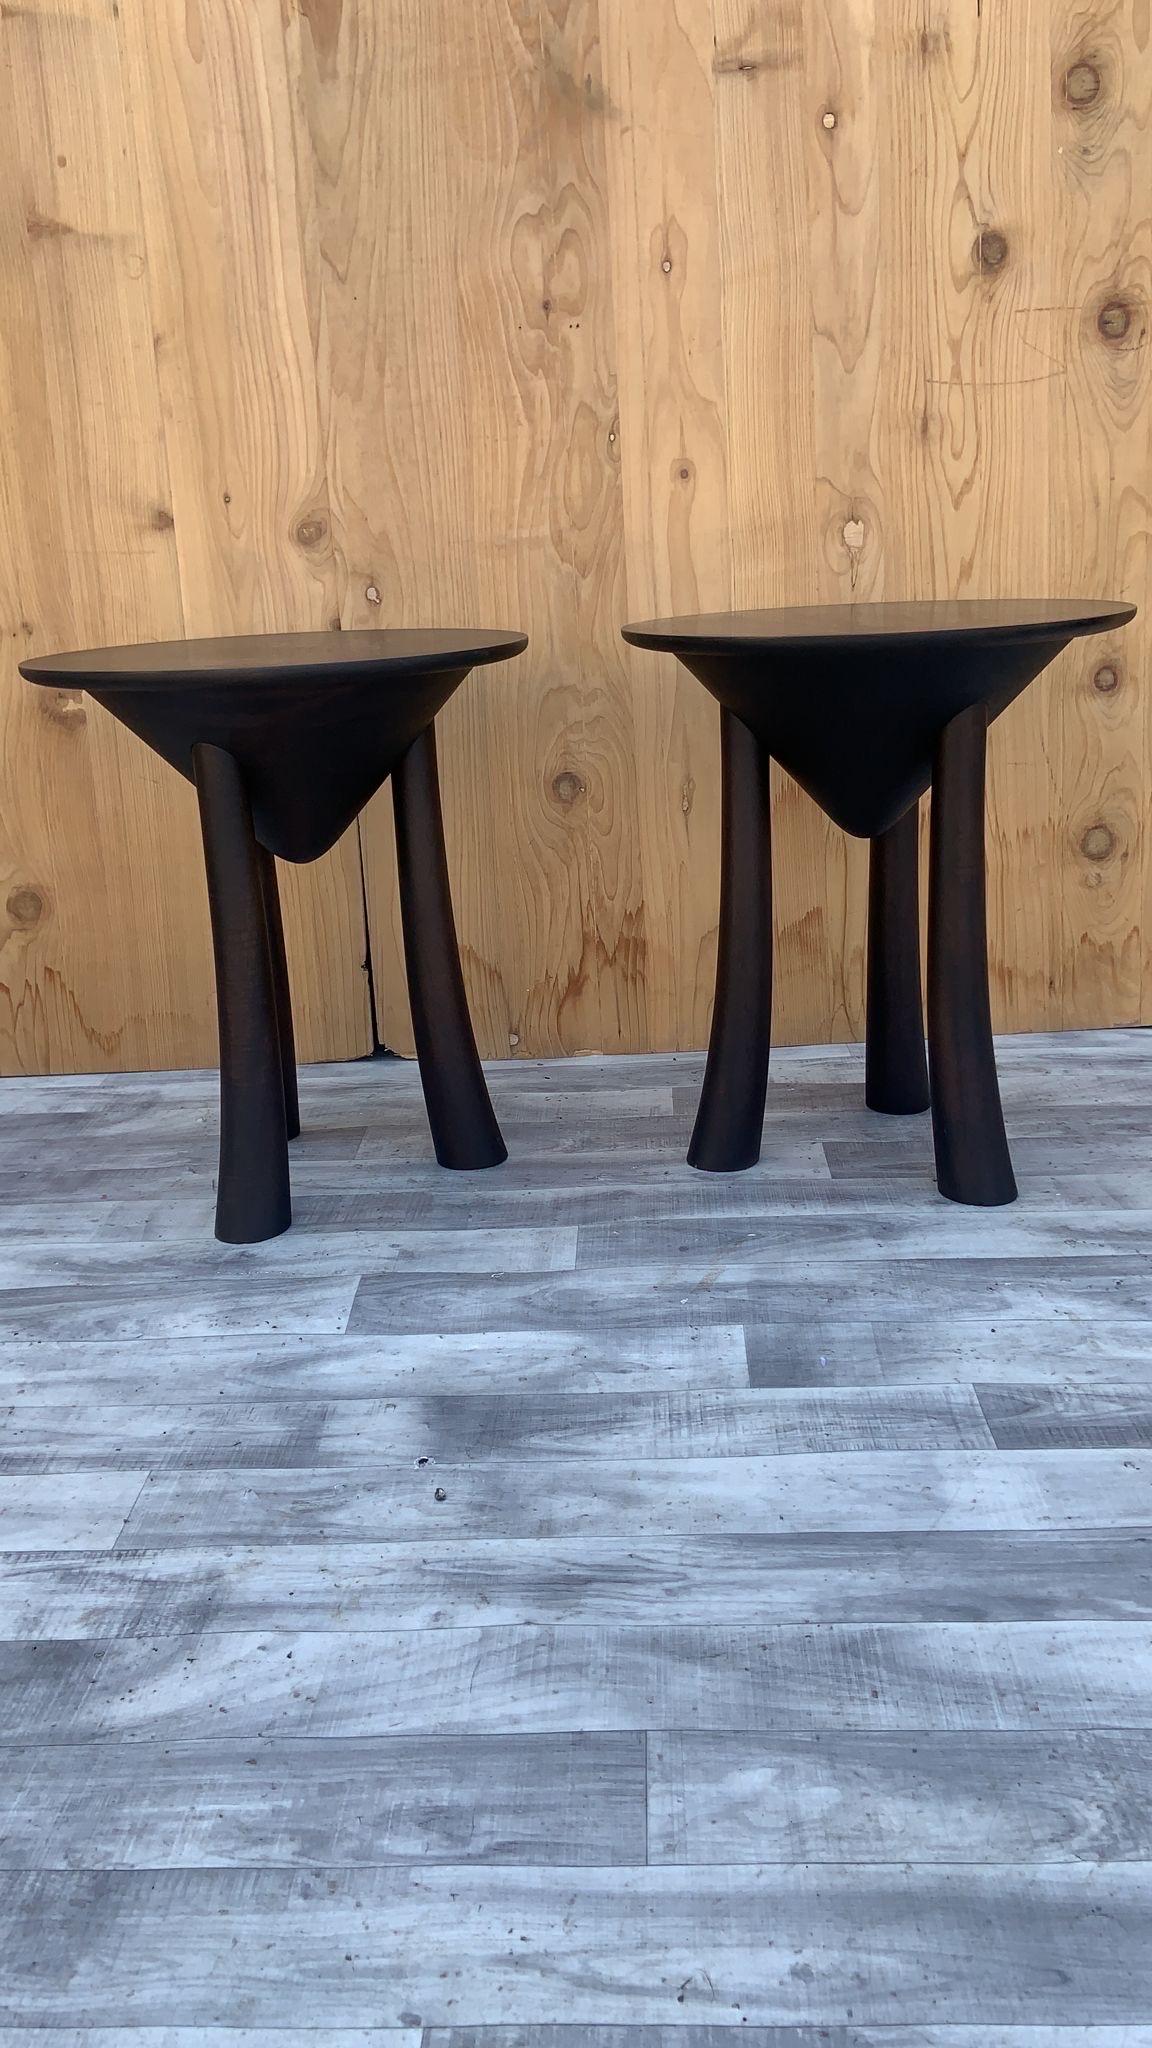 Vintage Modern Minimalist Sculpted 3 Arched Leg Side Table - Pair 

Made in the style of ethnic minimalism, the collection items introduce “Senufo design.